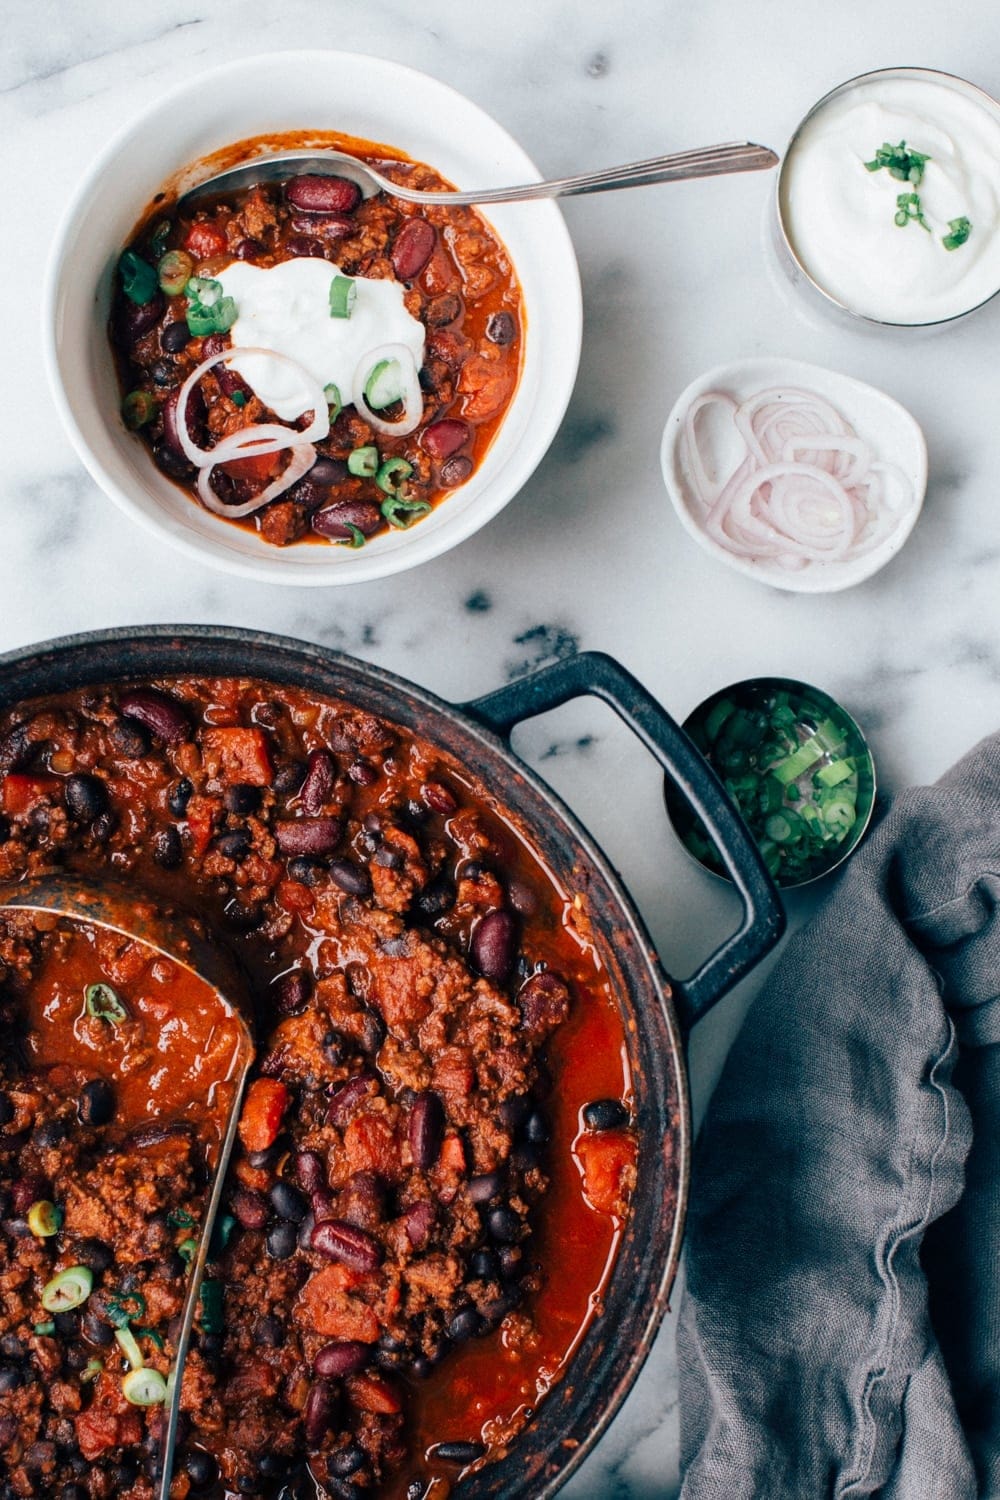 Ground beef chili in a pot with a bowl of chili next to it.